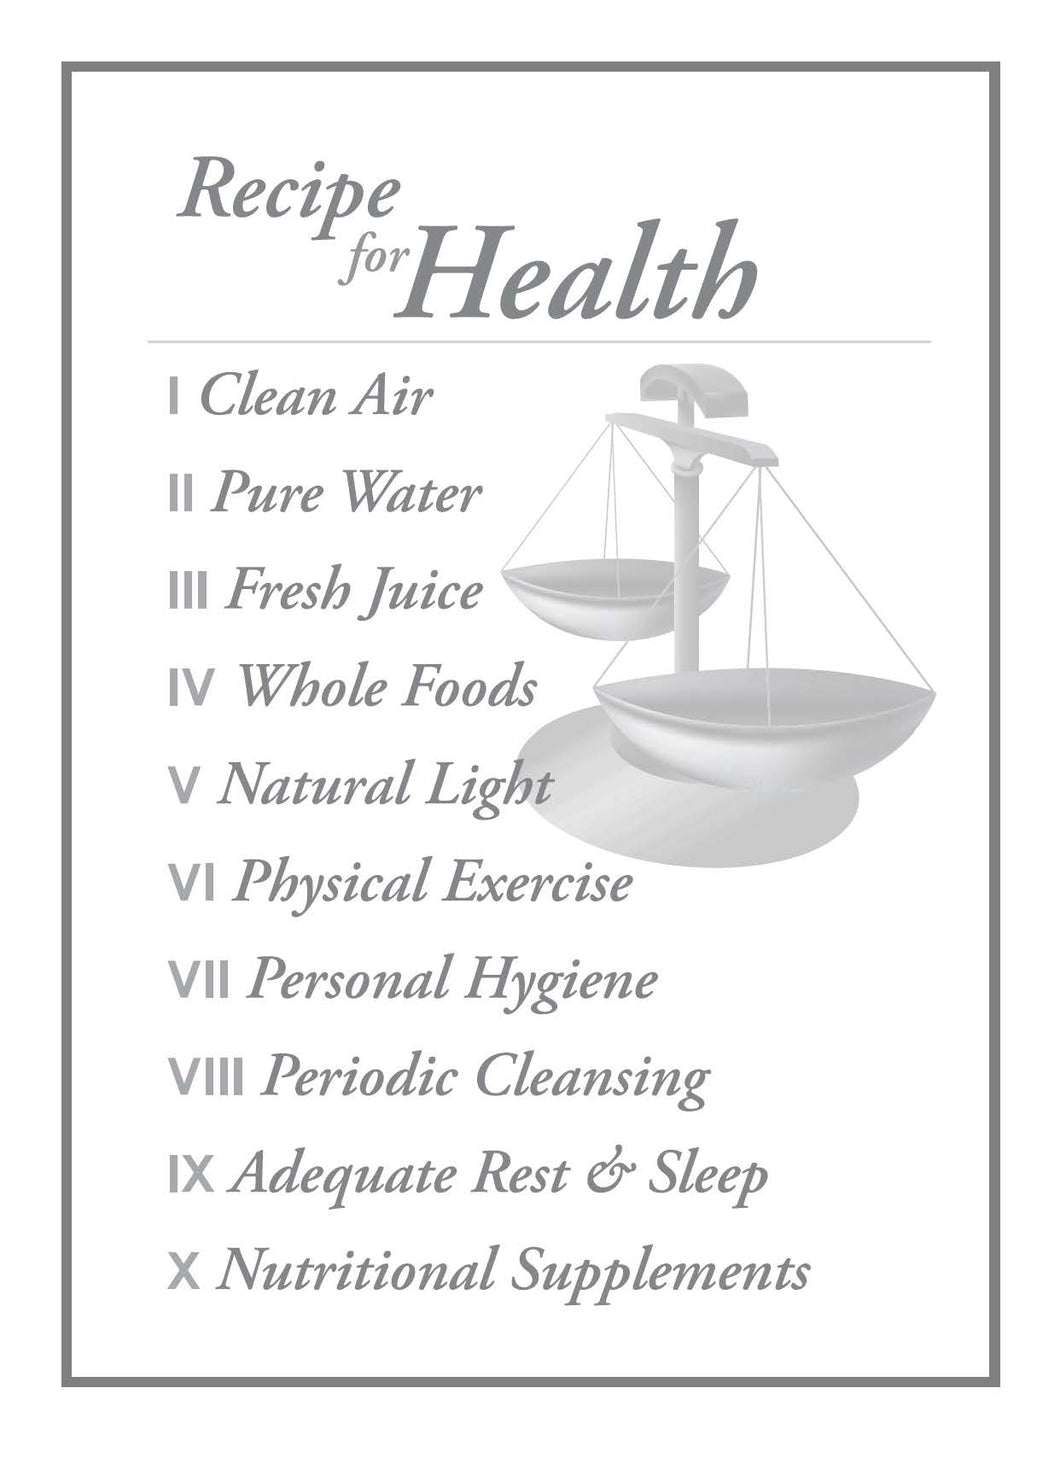 How To Get Well (Recipe For Health)